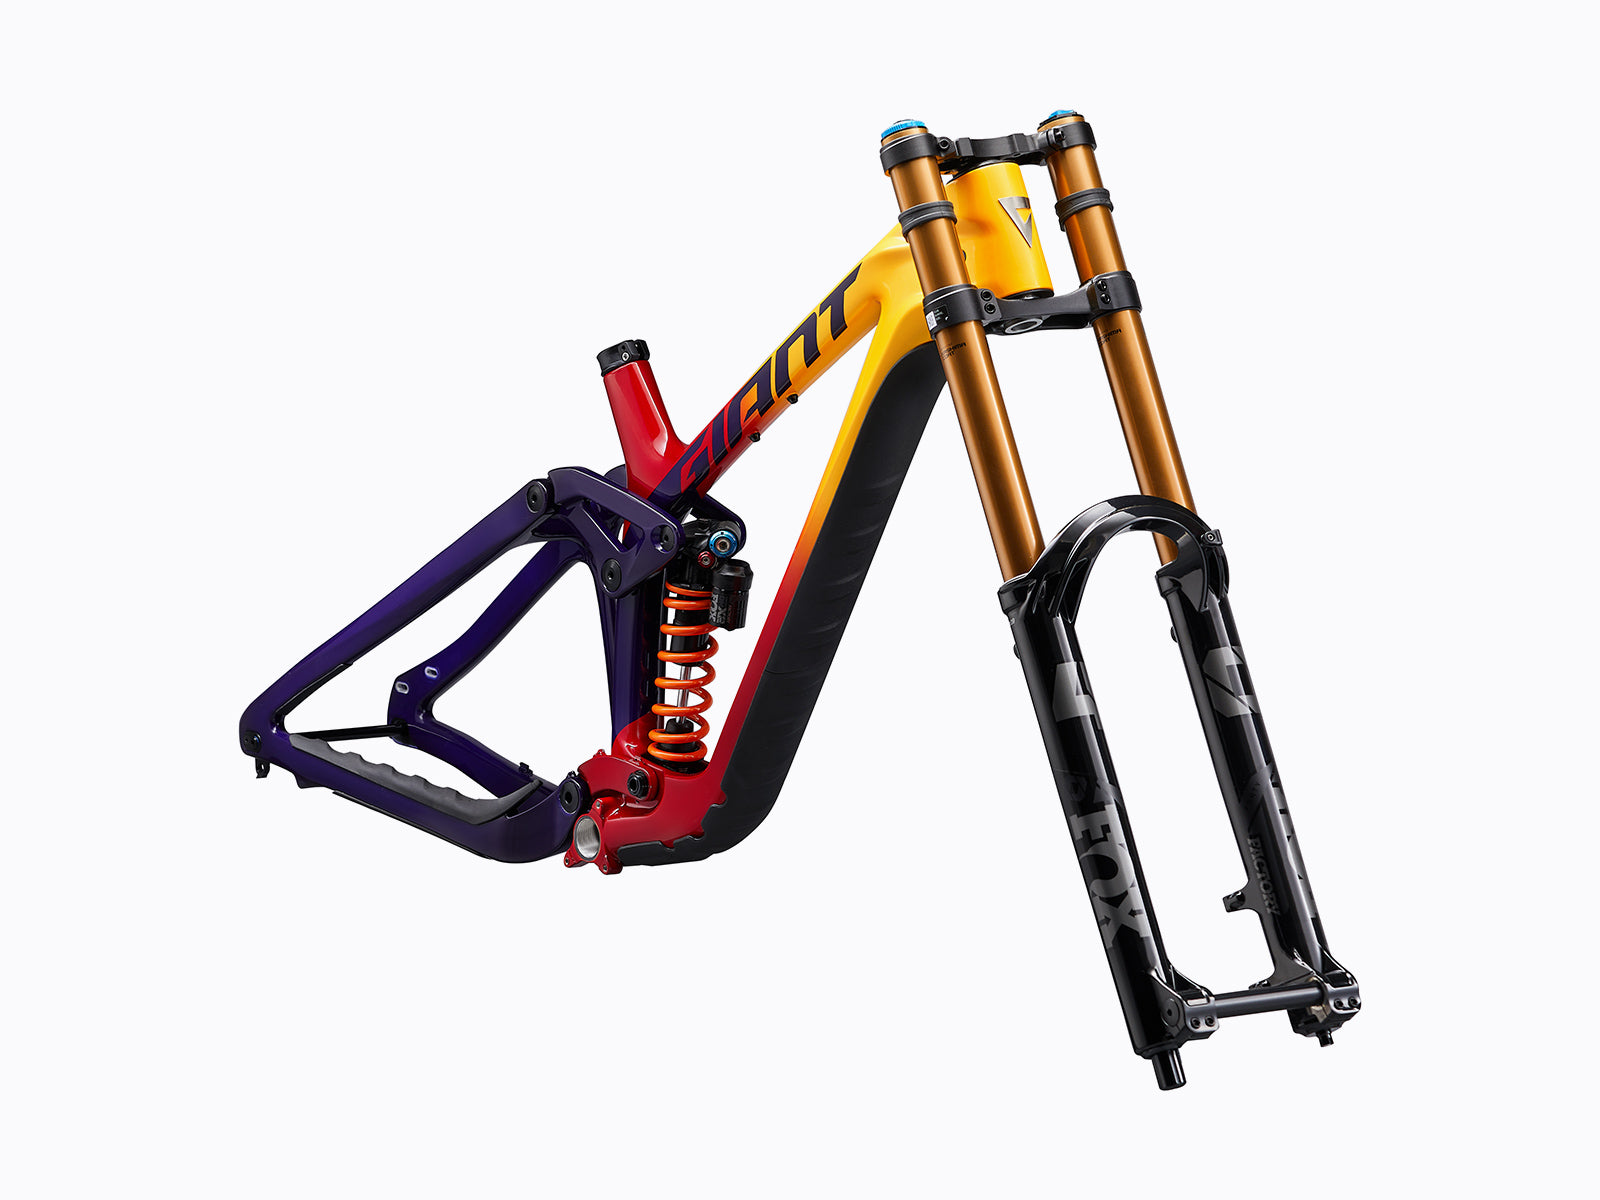 Giant Glory Advanced Pro-FR Legends Edition mtb frameset in yellow, red and dark blue colour accents.